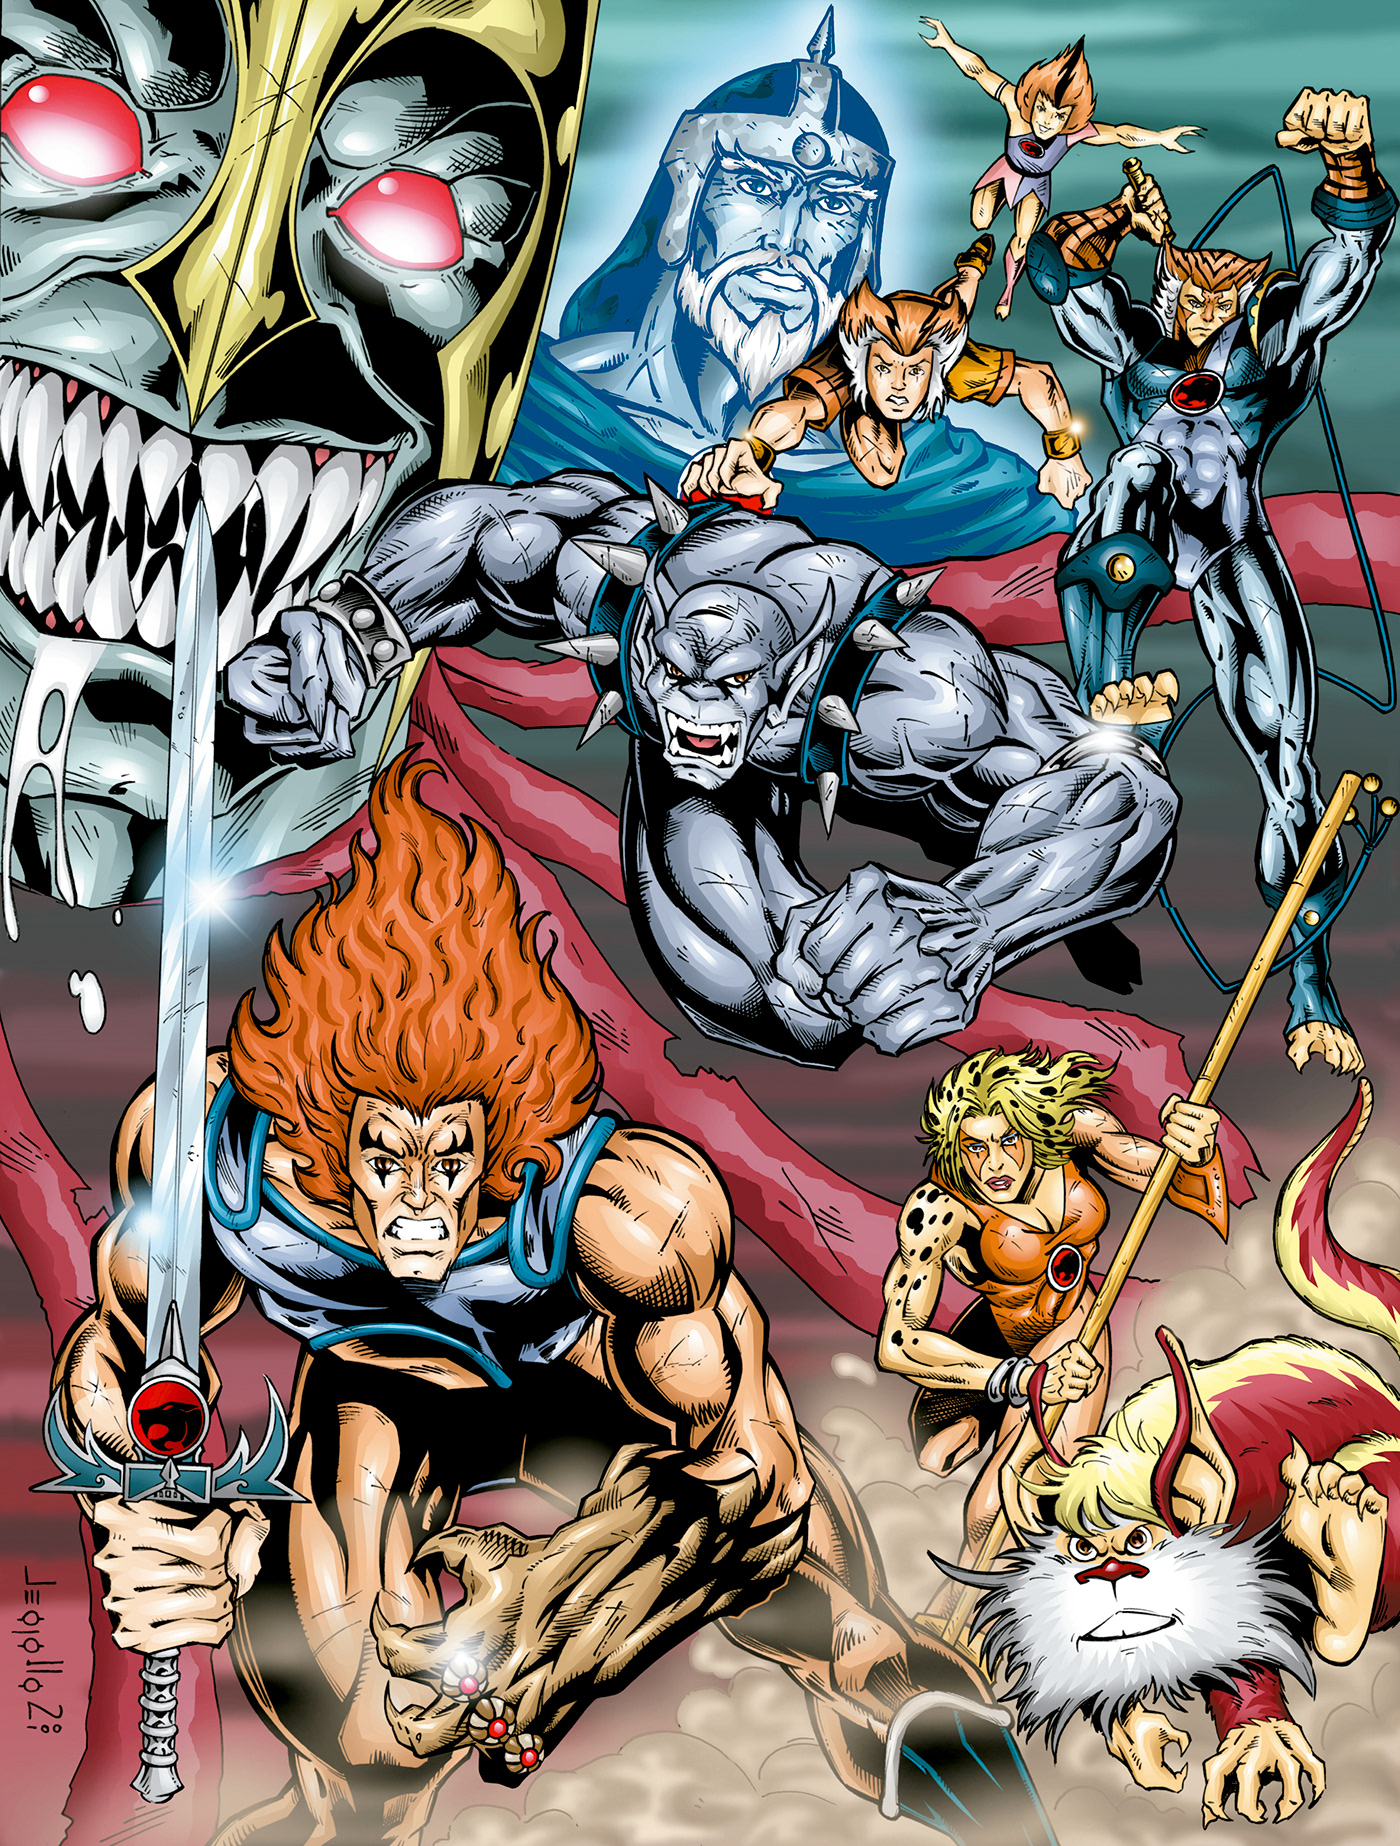 Old ThunderCats Fanart - colors by Julio Cesar Zvir.